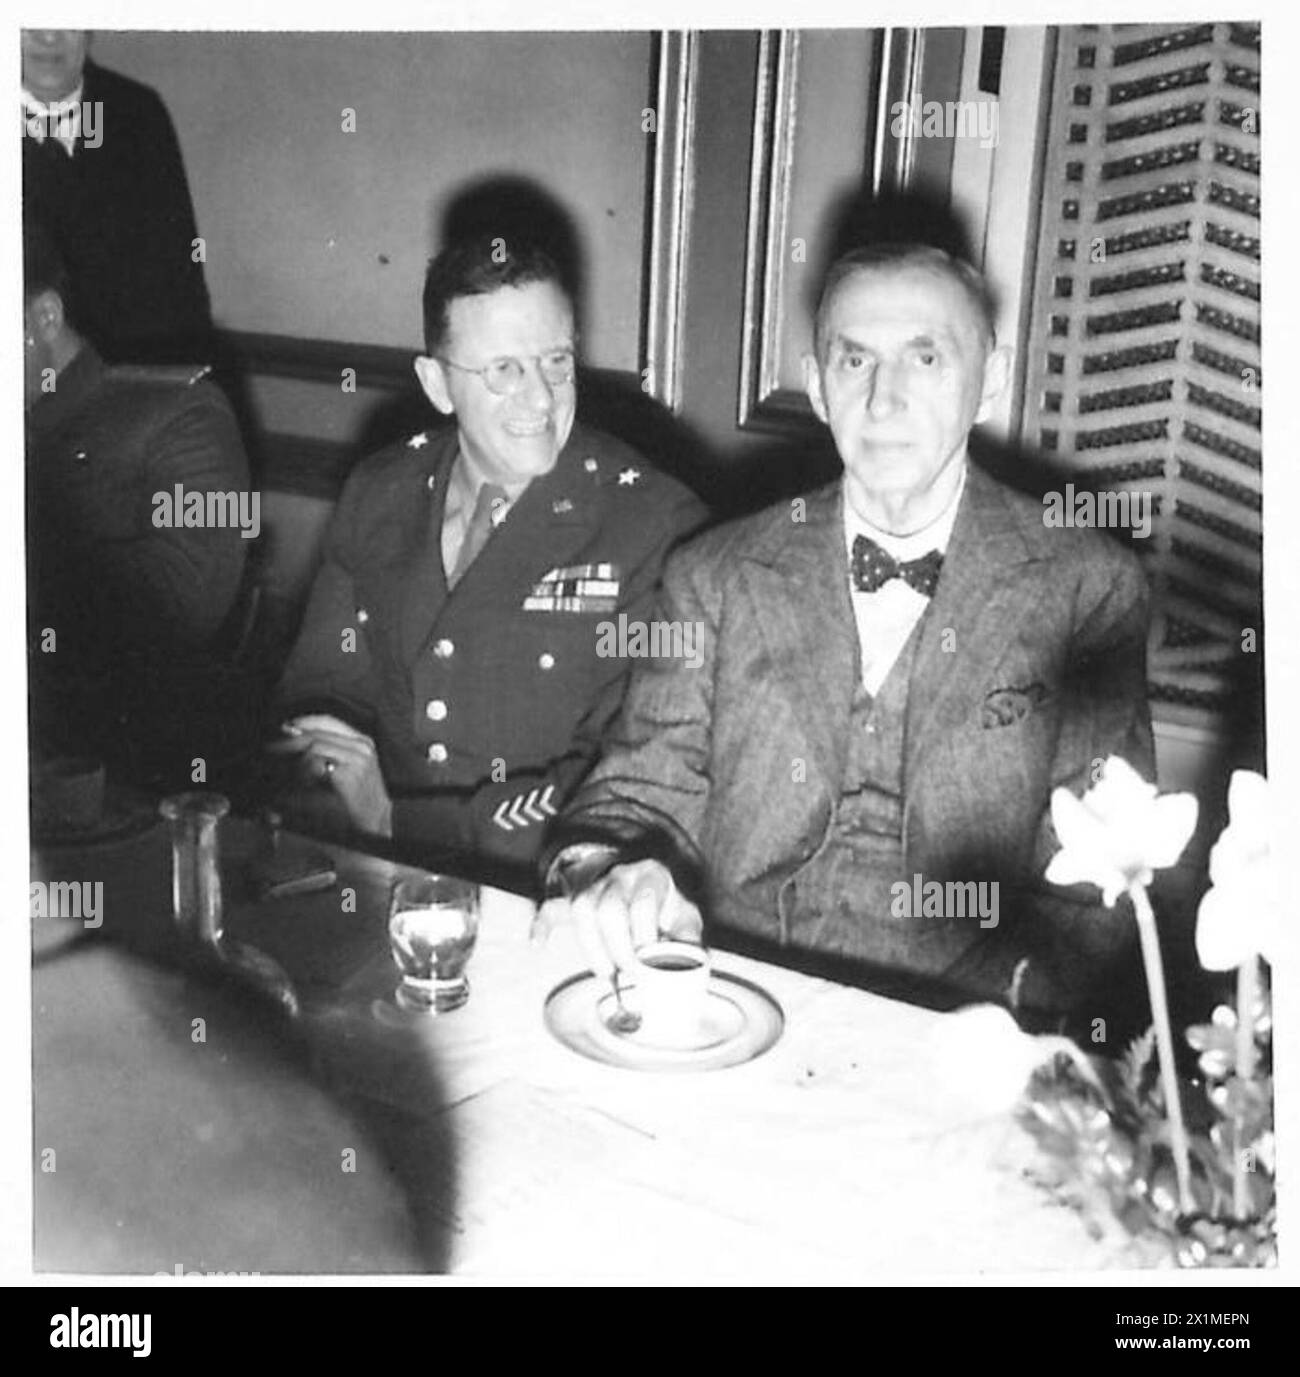 'SALUTE THE SOLDIER' LUNCHEON - General Dobbie and Brigadier General P.E. Peabody [American Military Attache], British Army Stock Photo